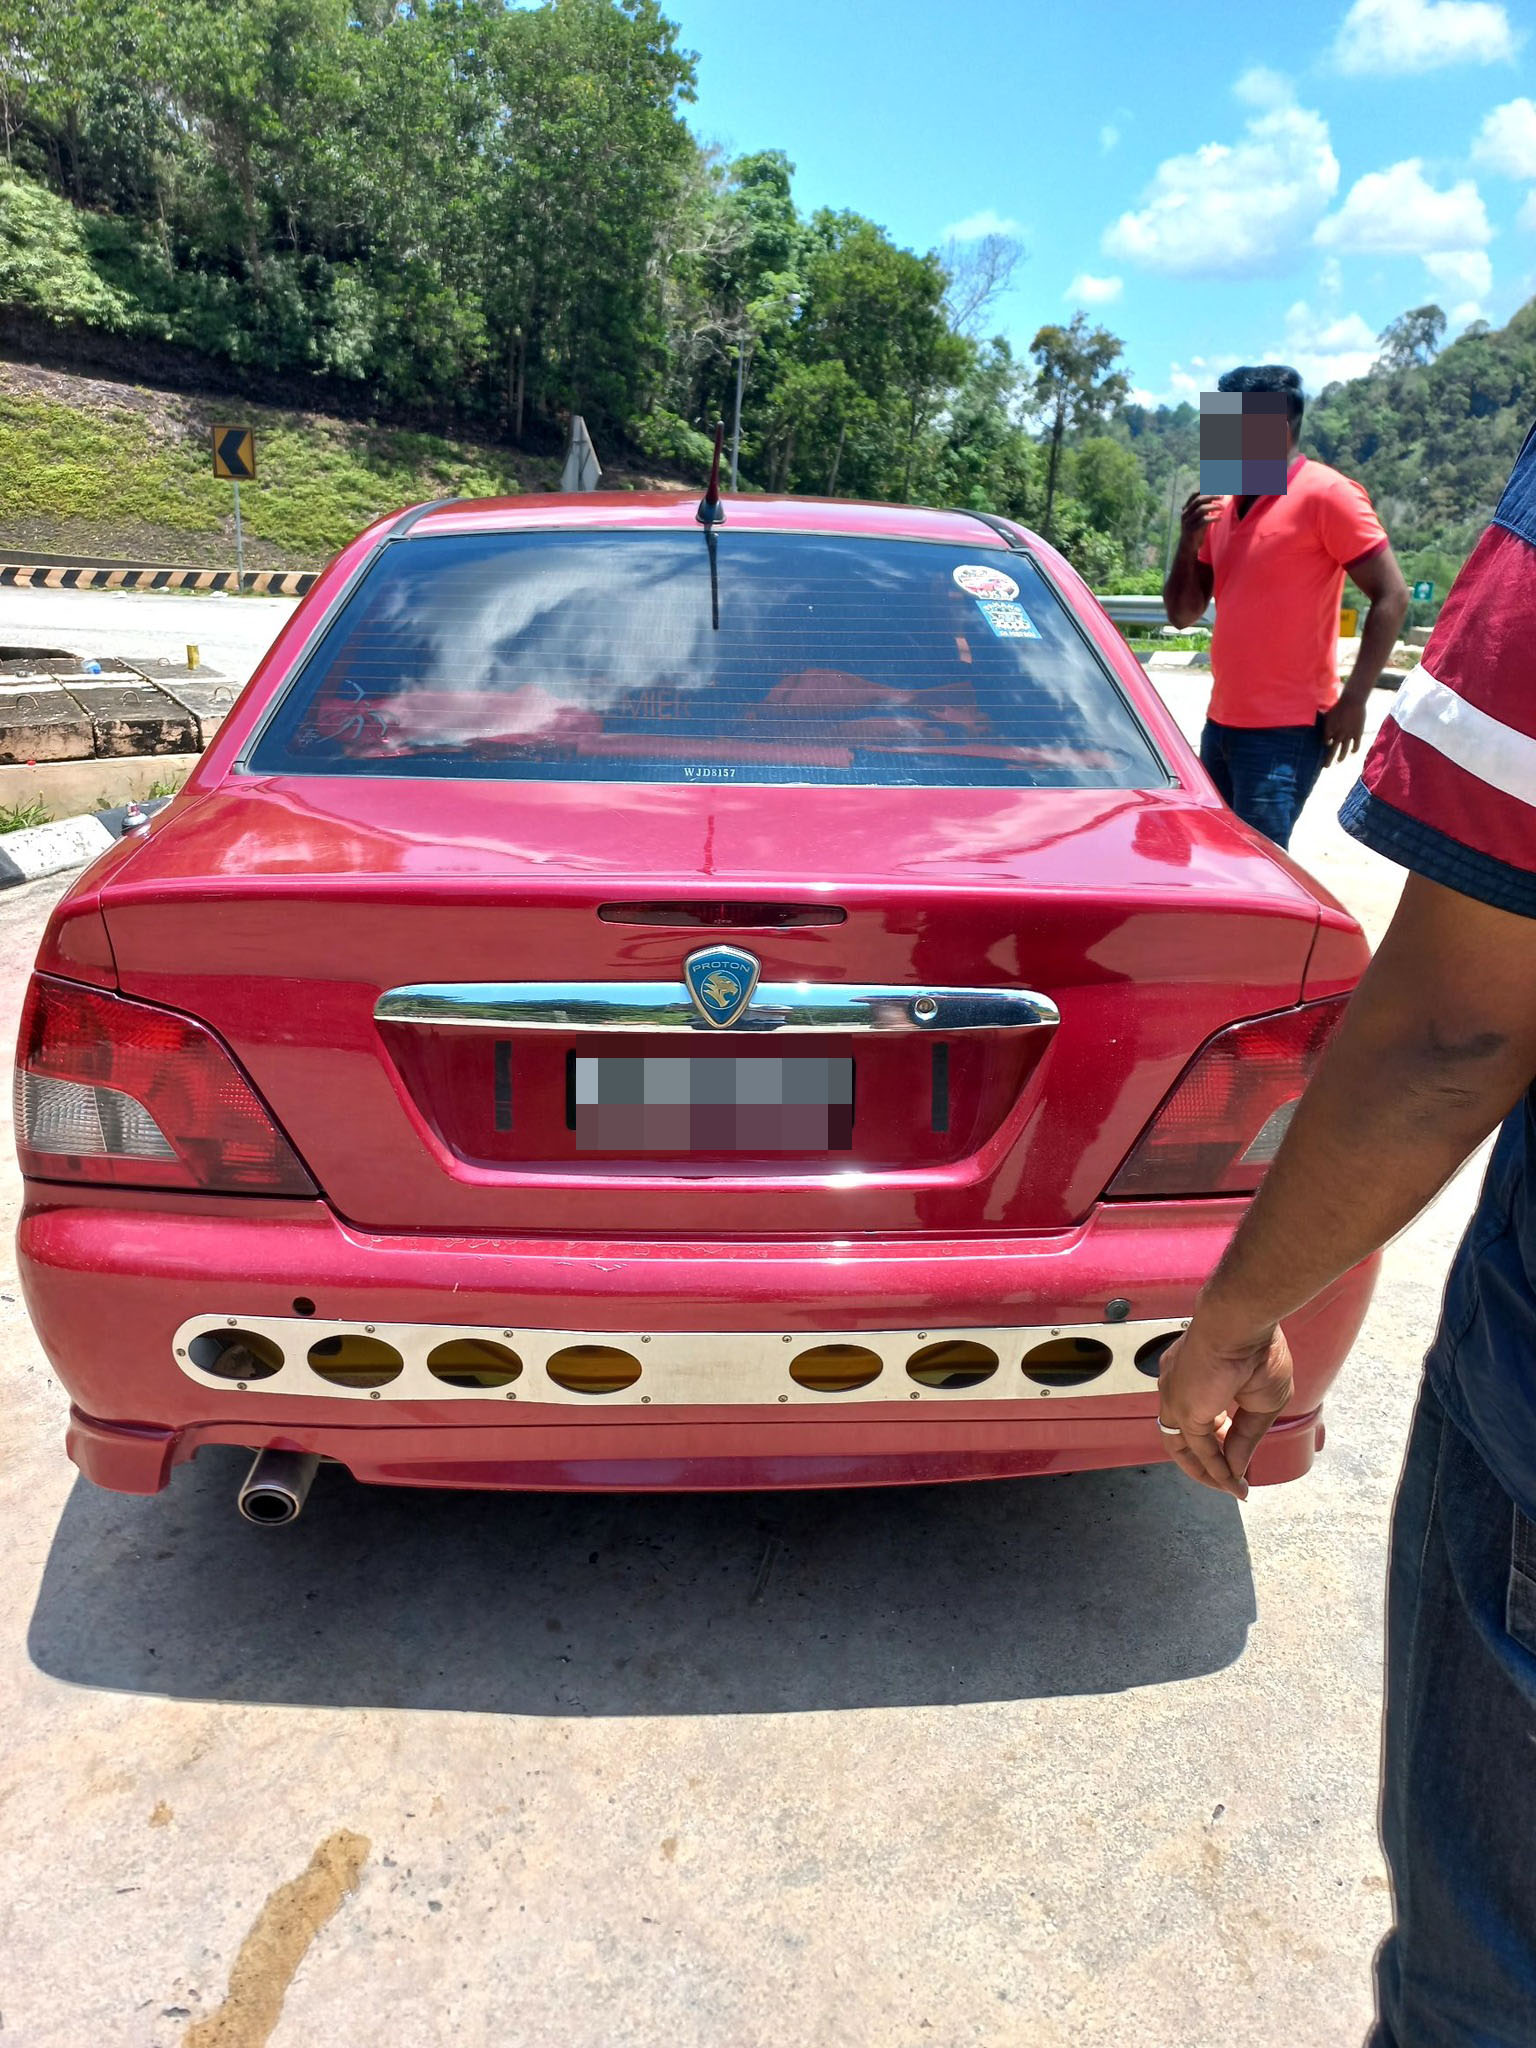 A group of four men in a Proton Waja claimed that the netizen had unpaid arrears and threatened to tow away his car. Source: Pengutip Besi Buruk